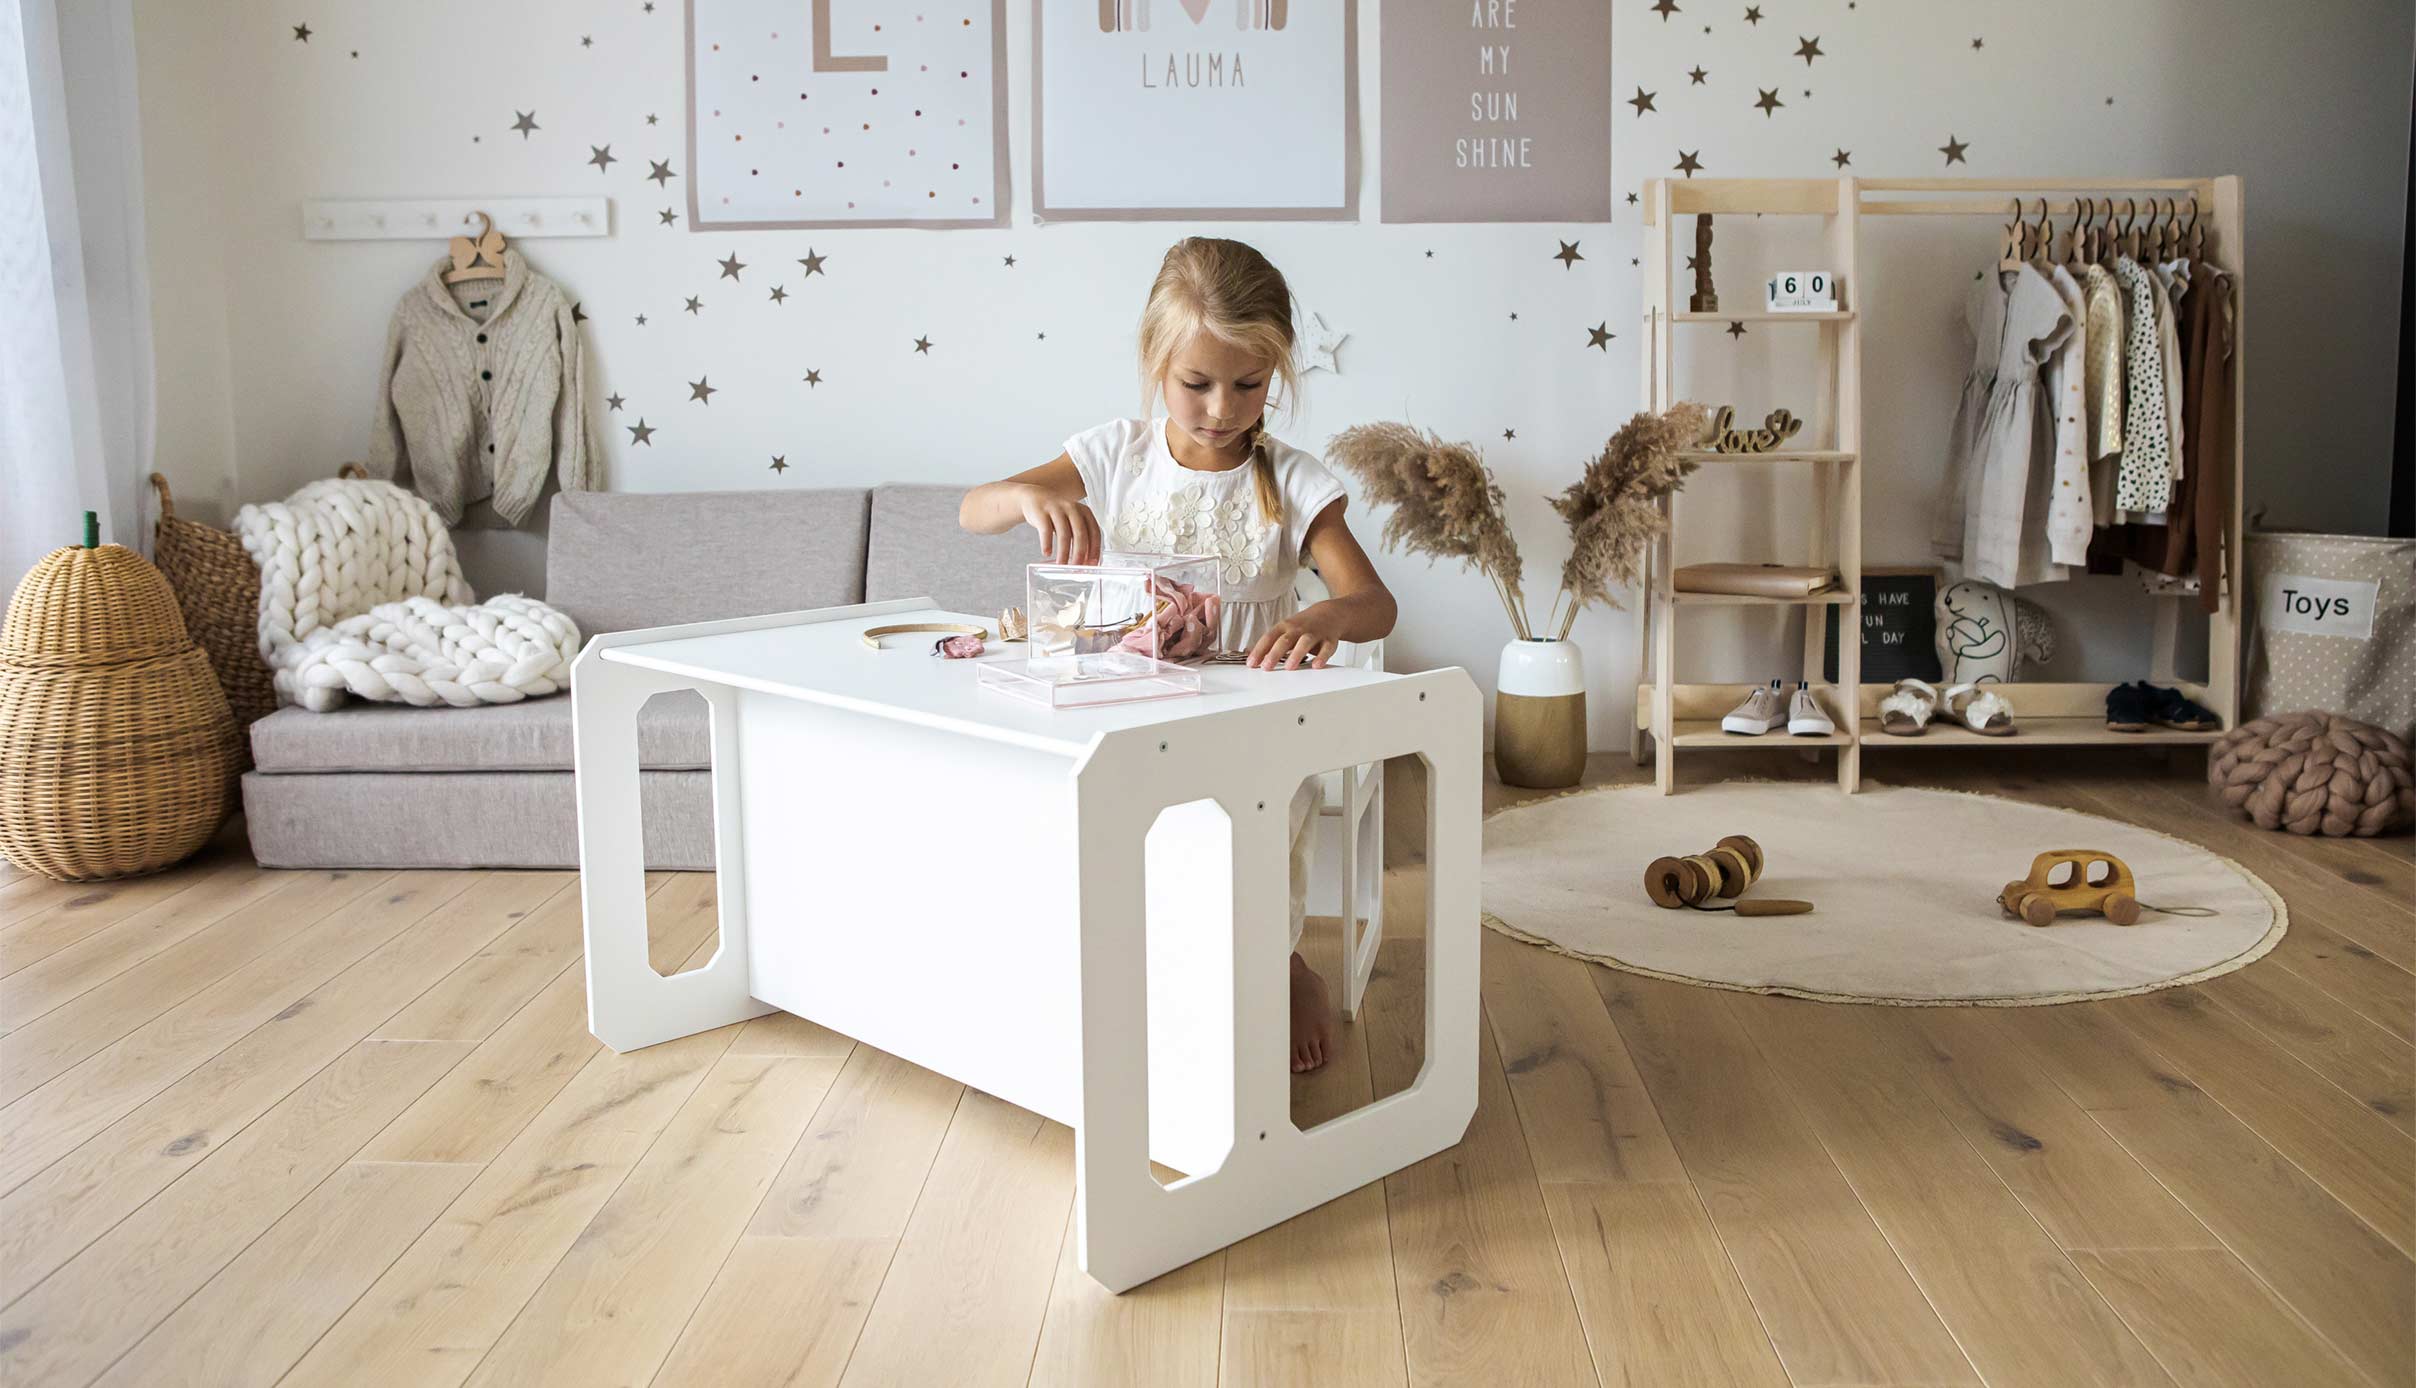 A little girl playing with a white table in a room.